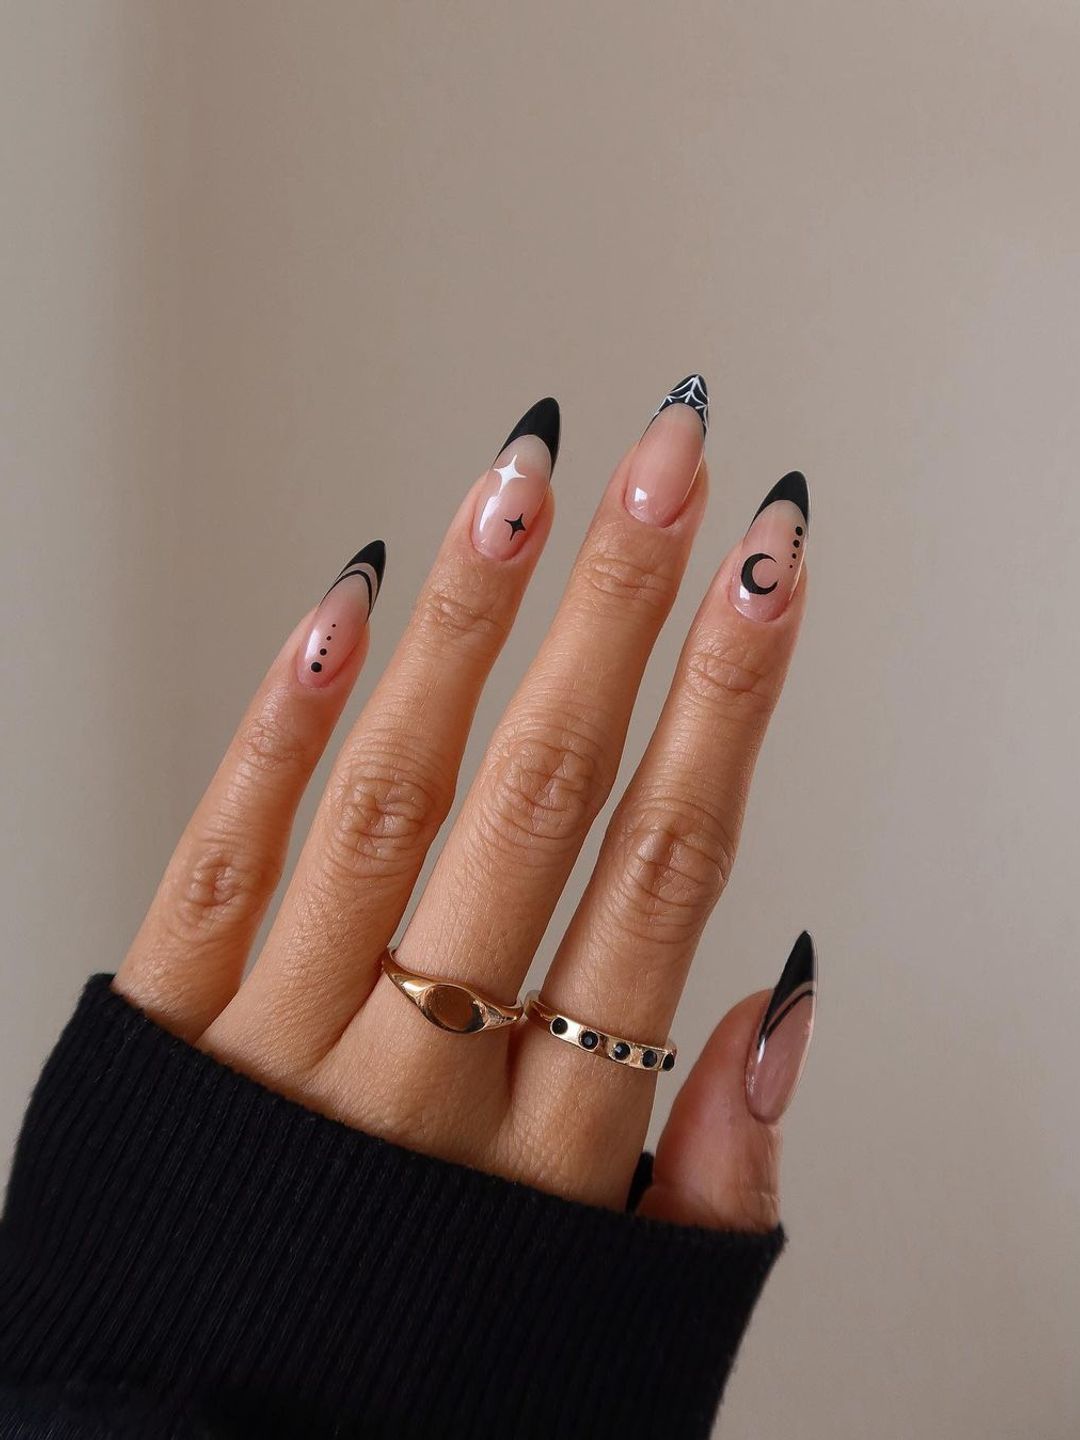 Nails with black tips and moon and stars art